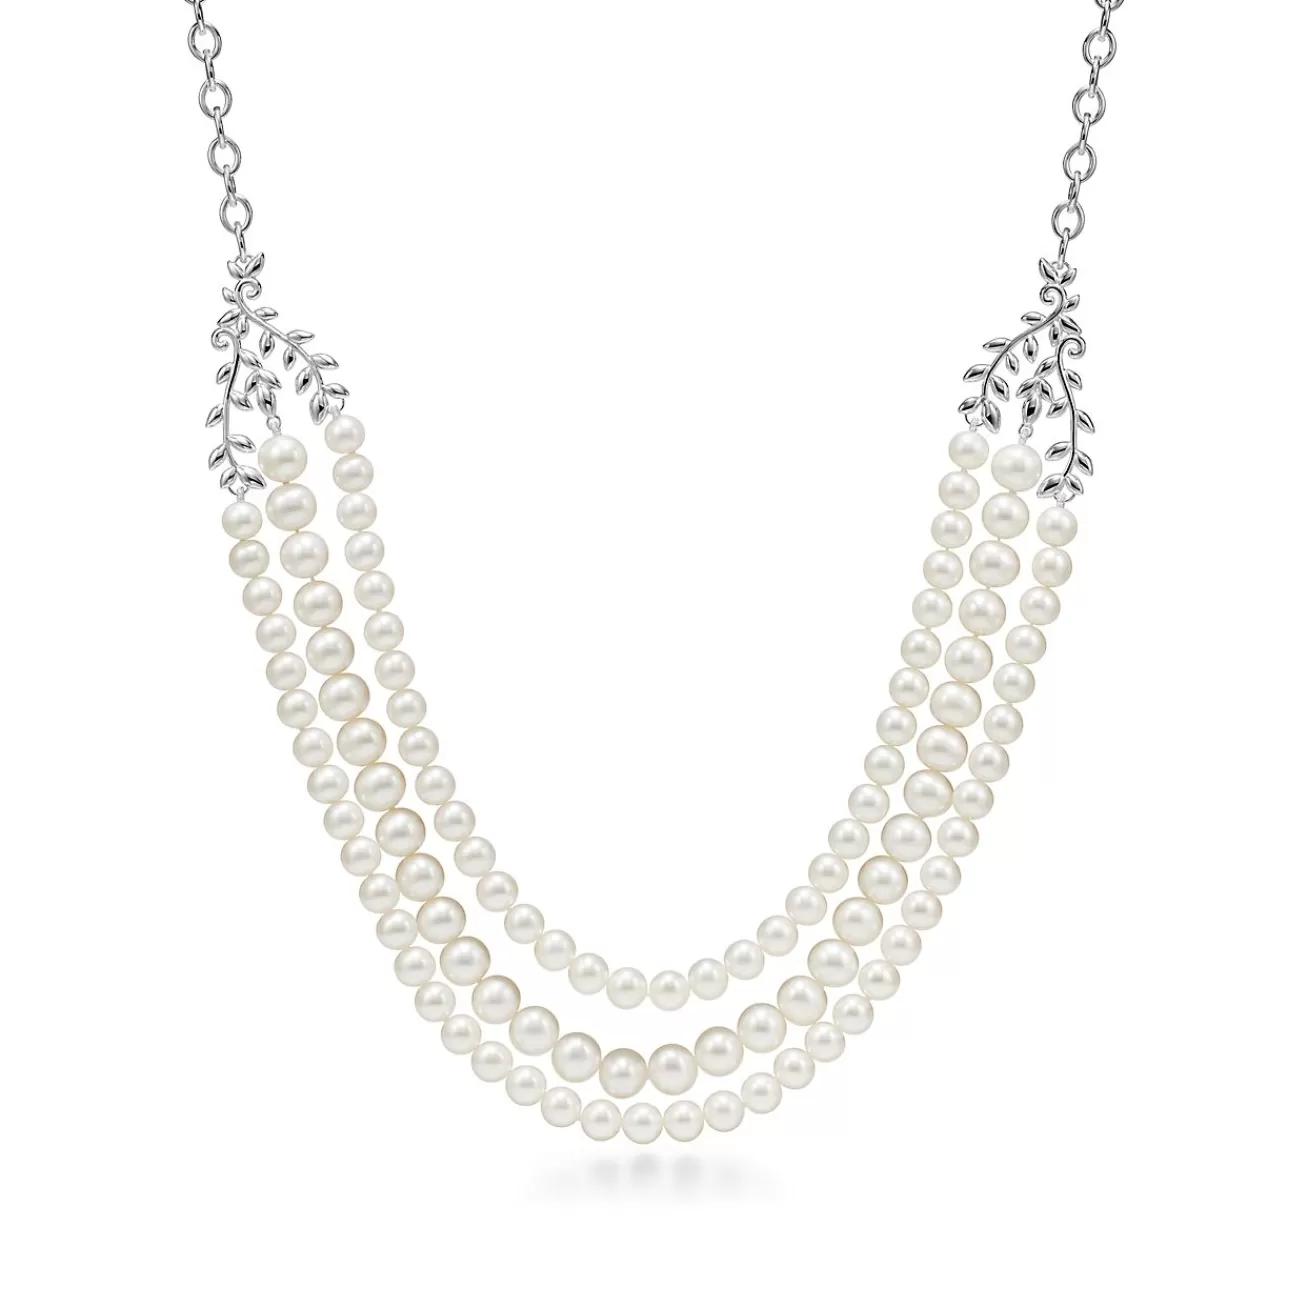 Tiffany & Co. Paloma Picasso® Olive Leaf three-row pearl necklace in sterling silver. | ^ Necklaces & Pendants | Sterling Silver Jewelry